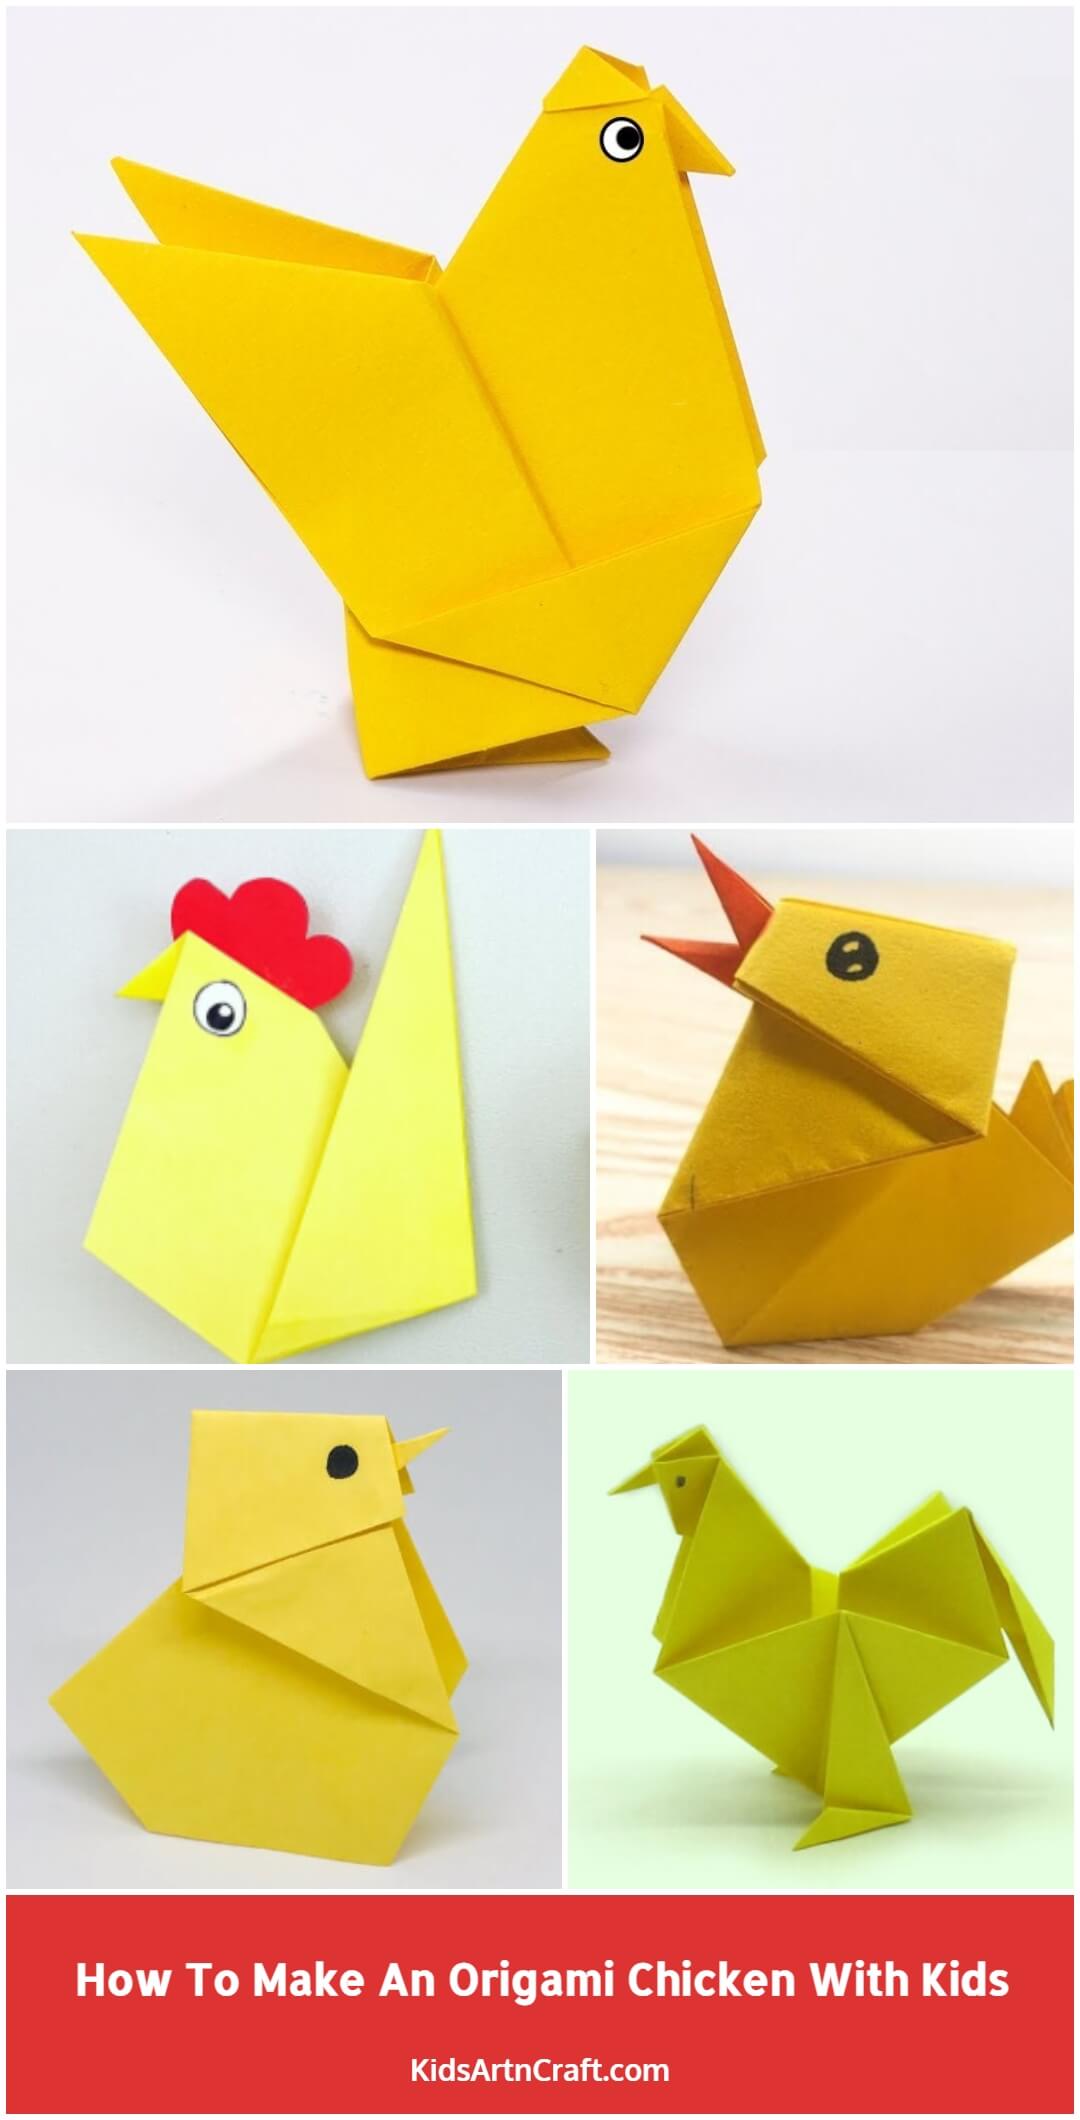 How To Make An Origami Chicken With Kids